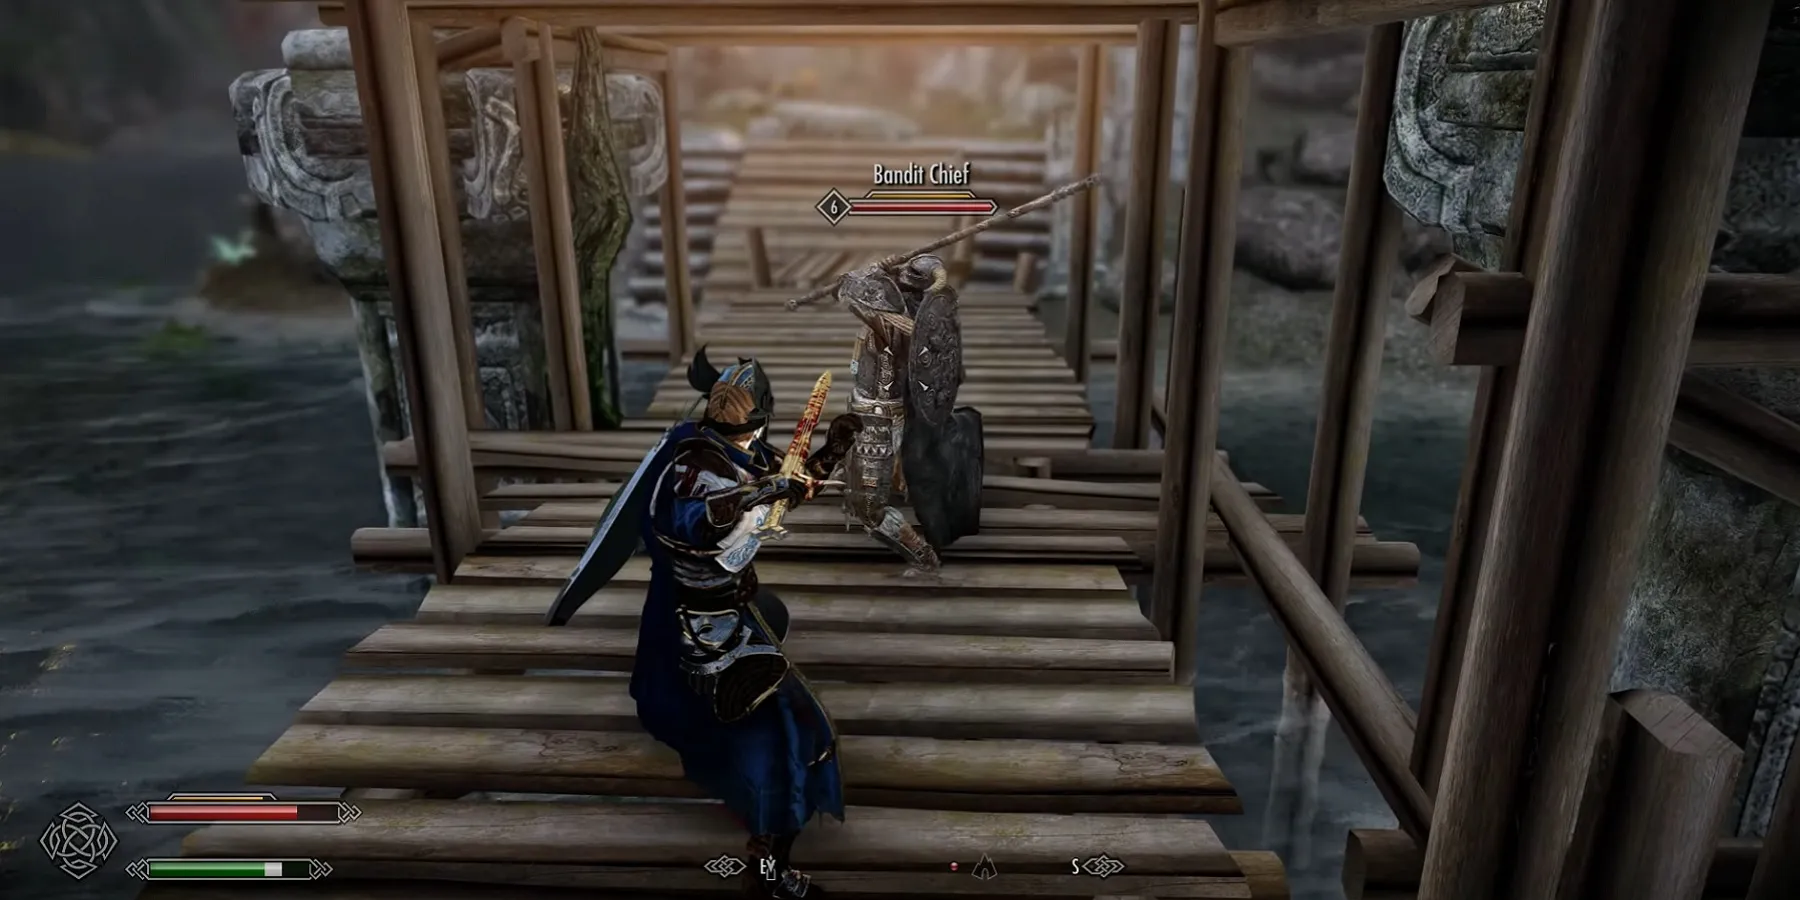 Image from Skyrim showing two people about to engage in combat on a bridge.